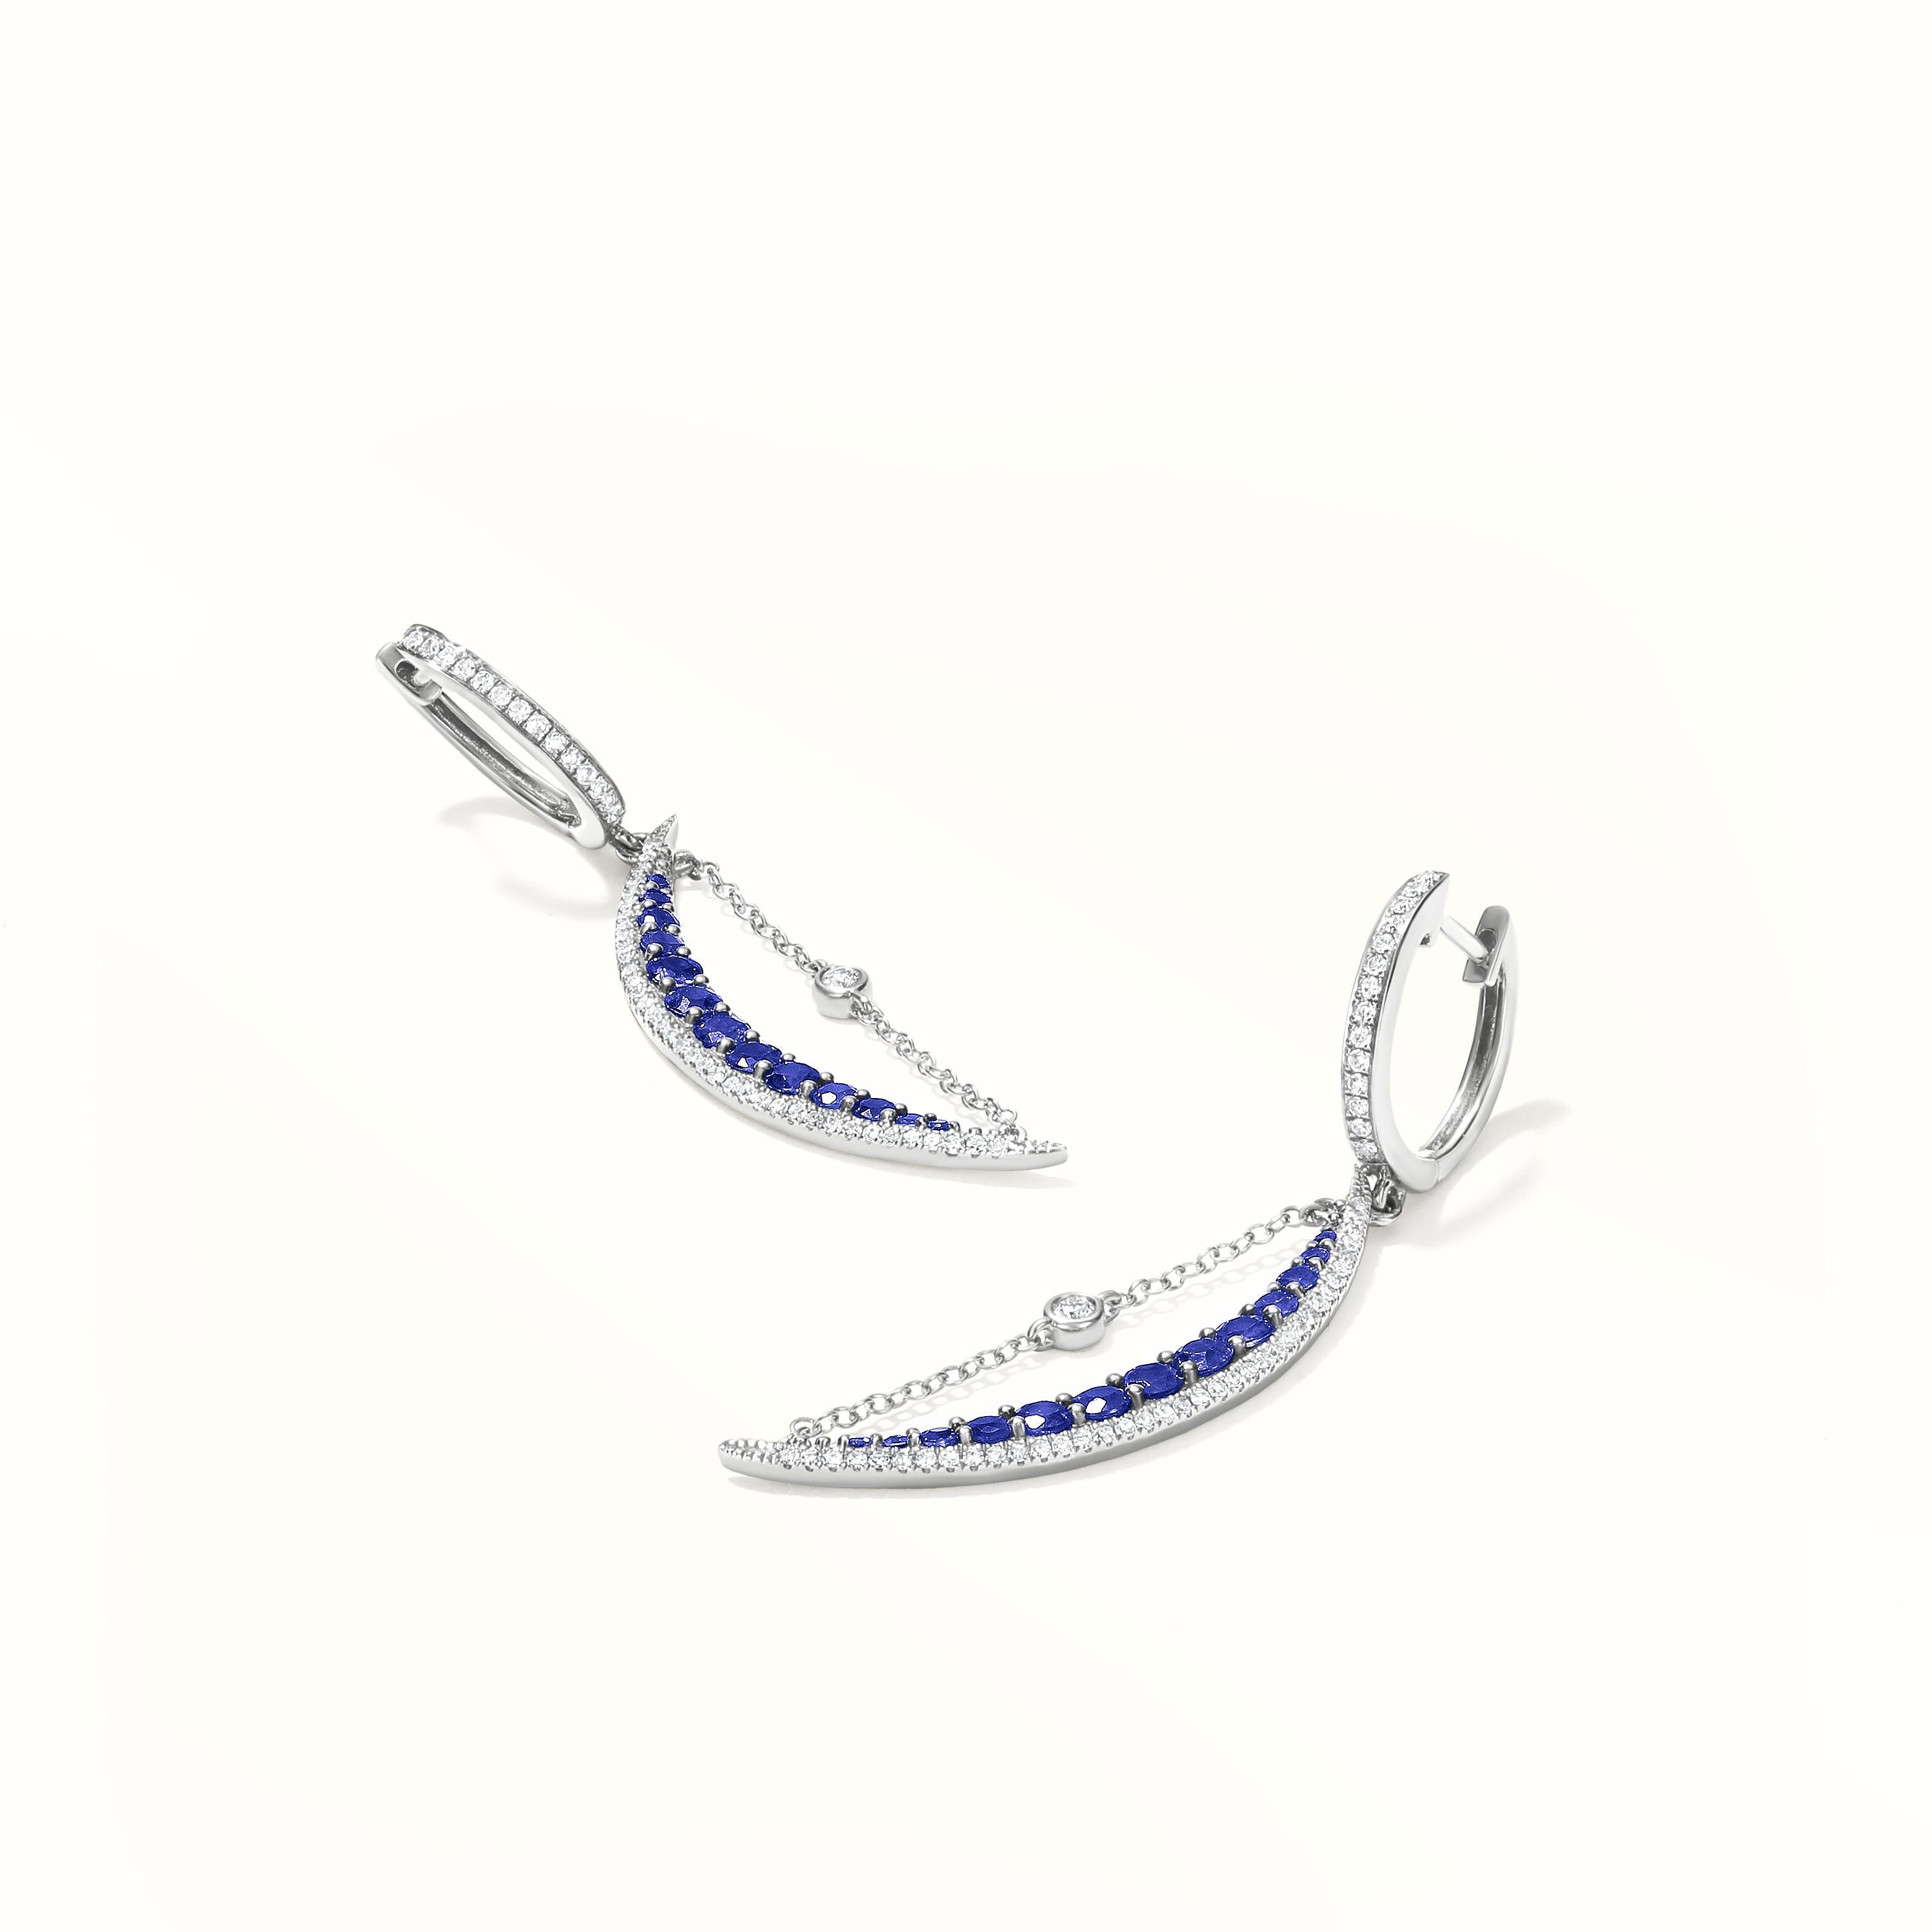 A stunning pair of Gemistry half-moon-shaped earrings with 26 round faceted brilliant blue sapphires set in pave. The piece is made of 14 Karat white gold and is encrusted with 104 round single-cut diamonds. Earrings with hugger clasps that lock